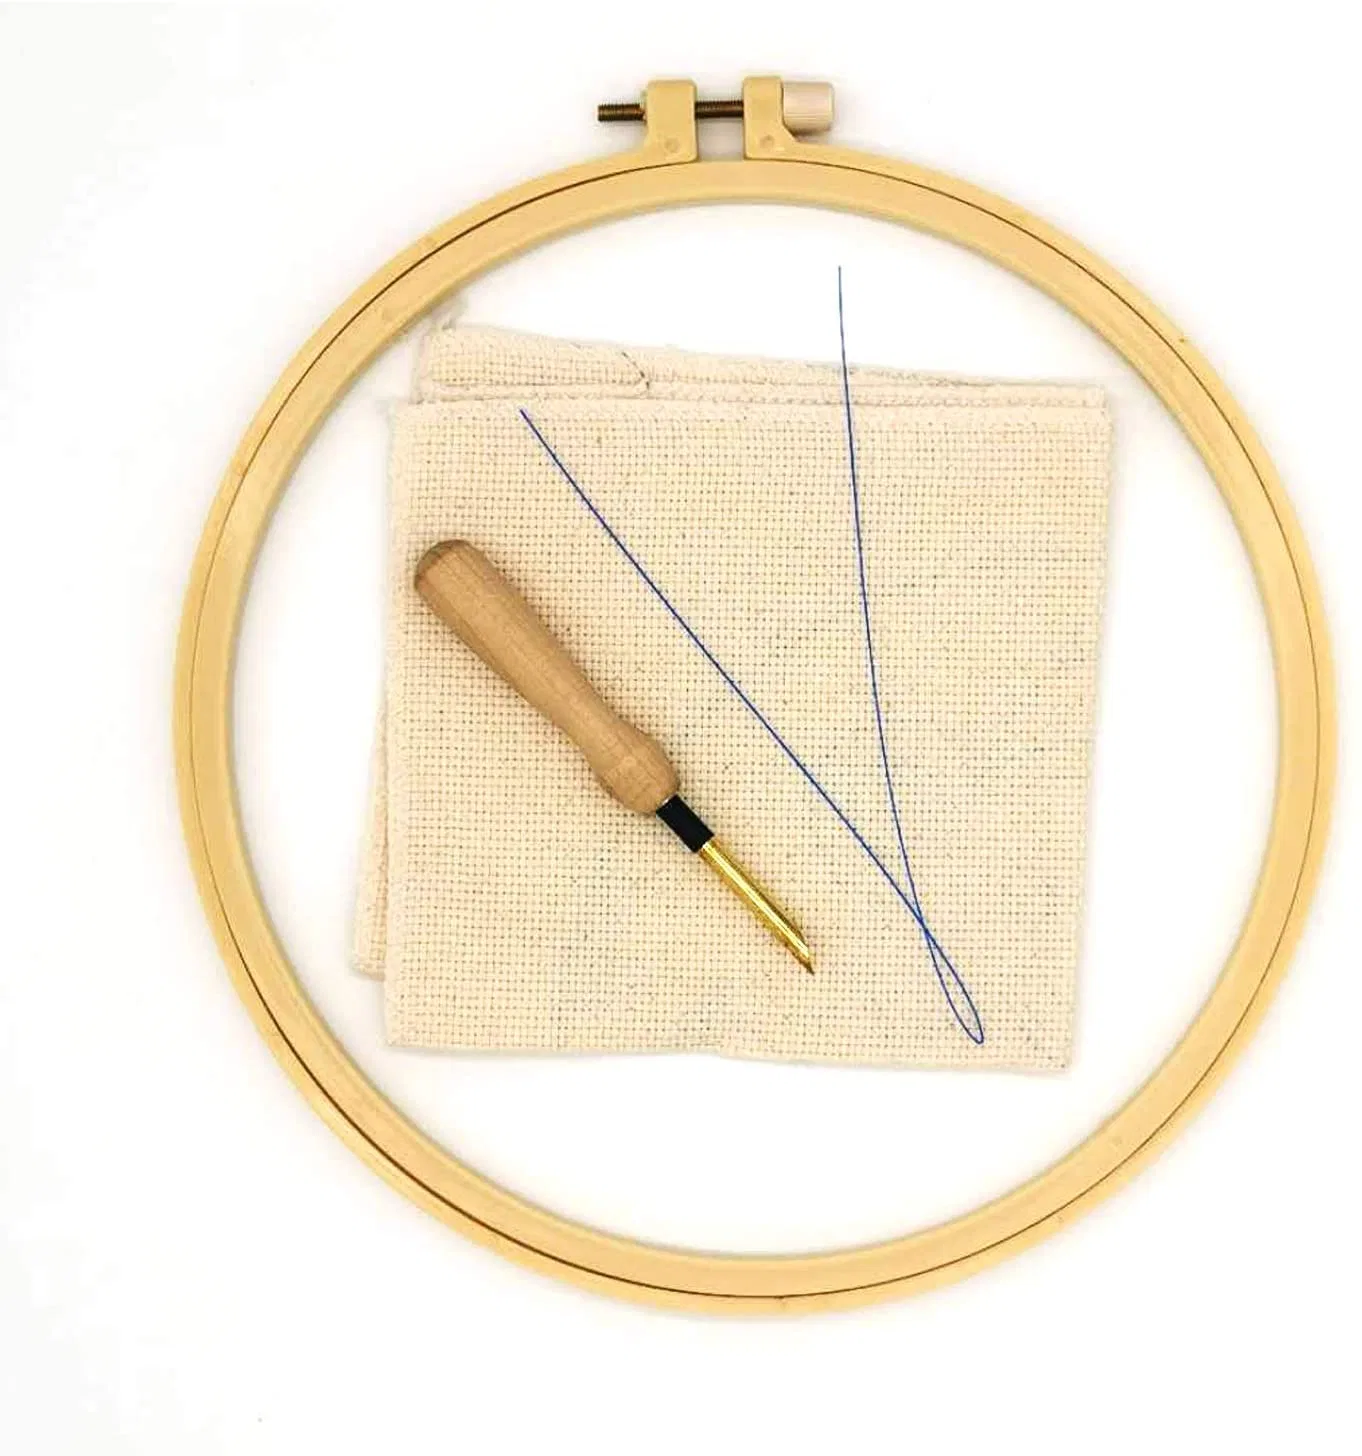 DIY Punching Needle Embroidery Starter Kits for Kids and Adults